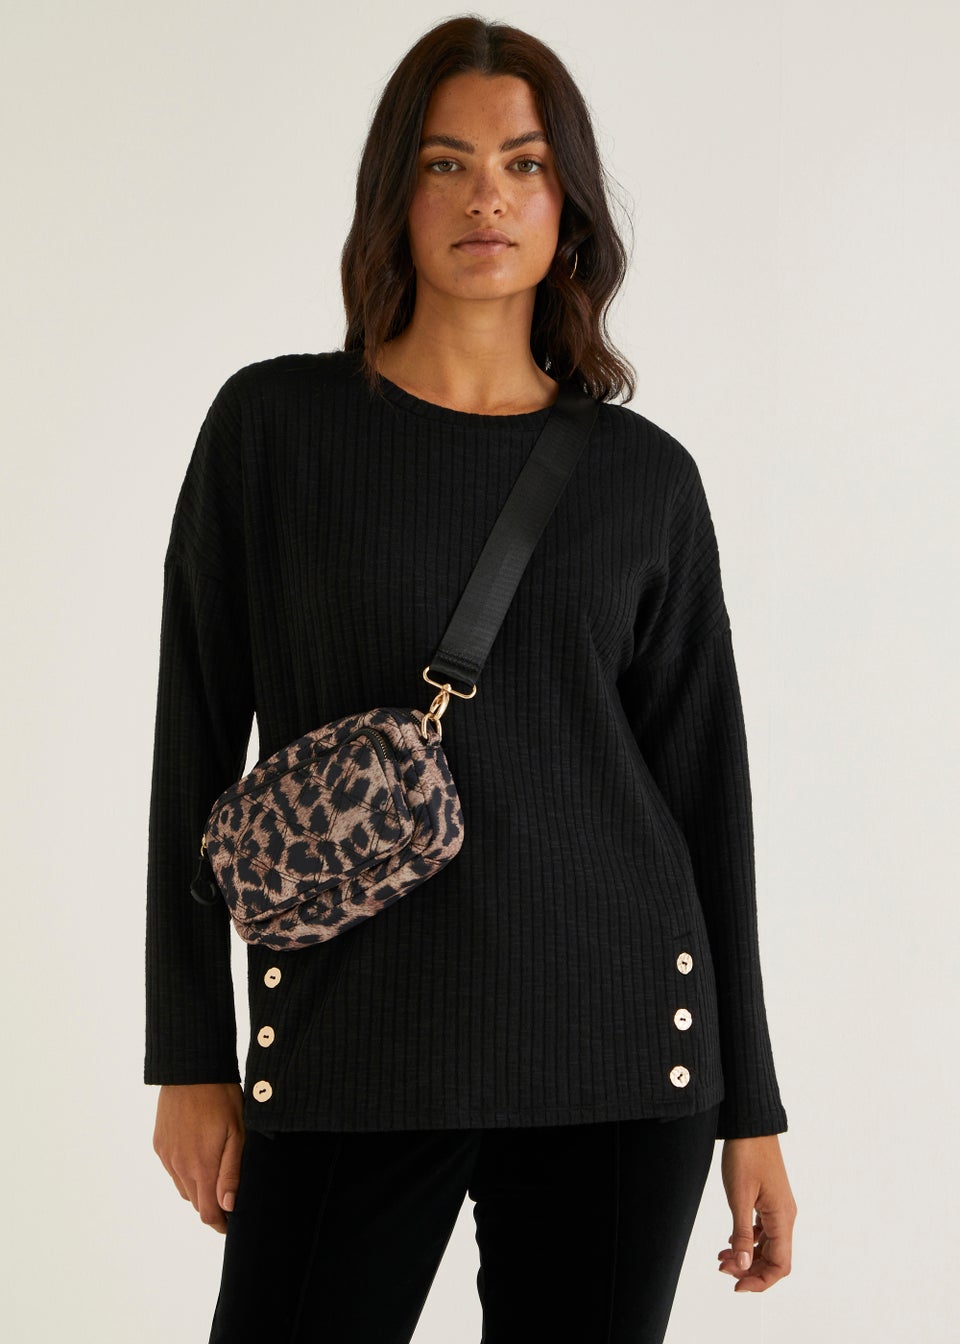 Animal Print Quilted Crossbody Bag